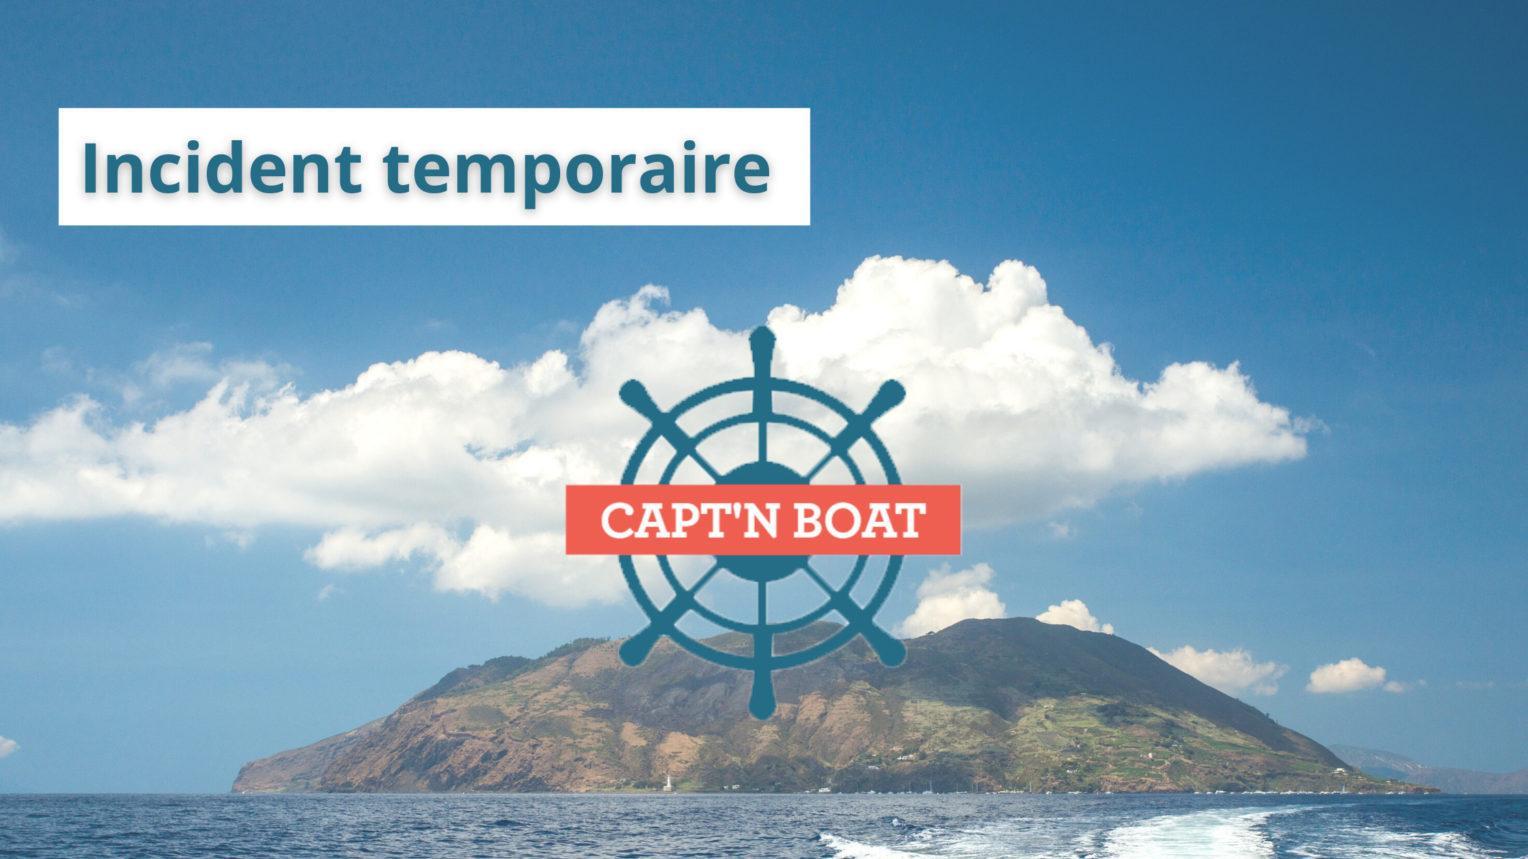 Site Capt'n Boat inaccessible